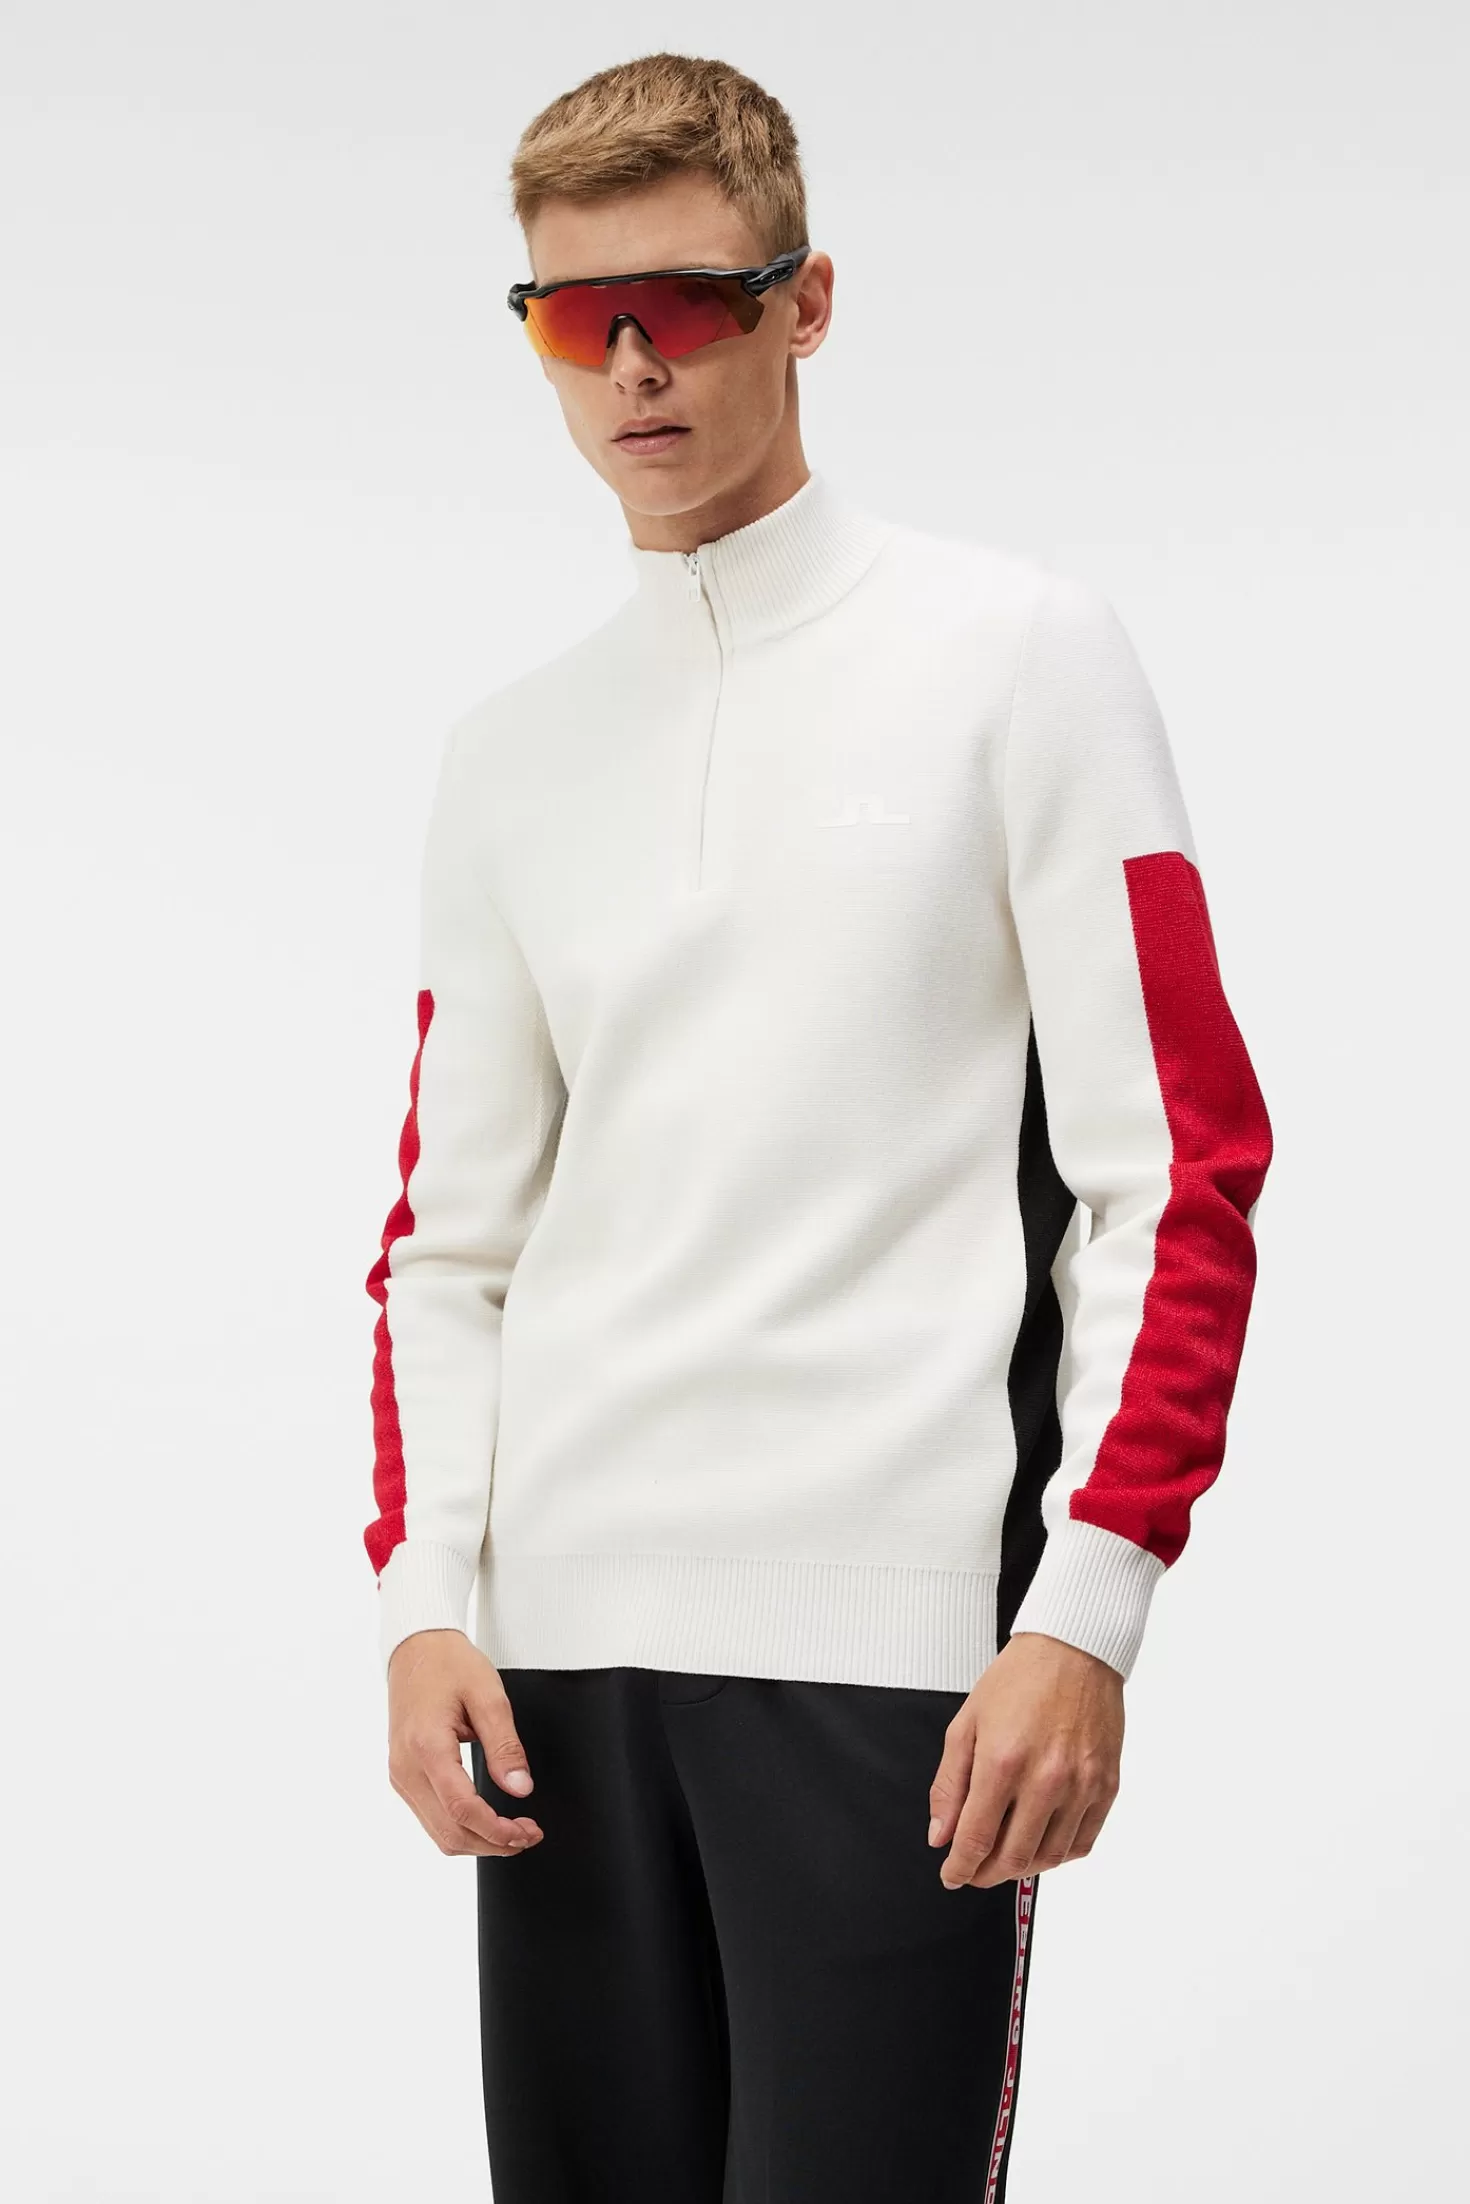 Stickat<J.Lindeberg Clide Knitted Sweater White